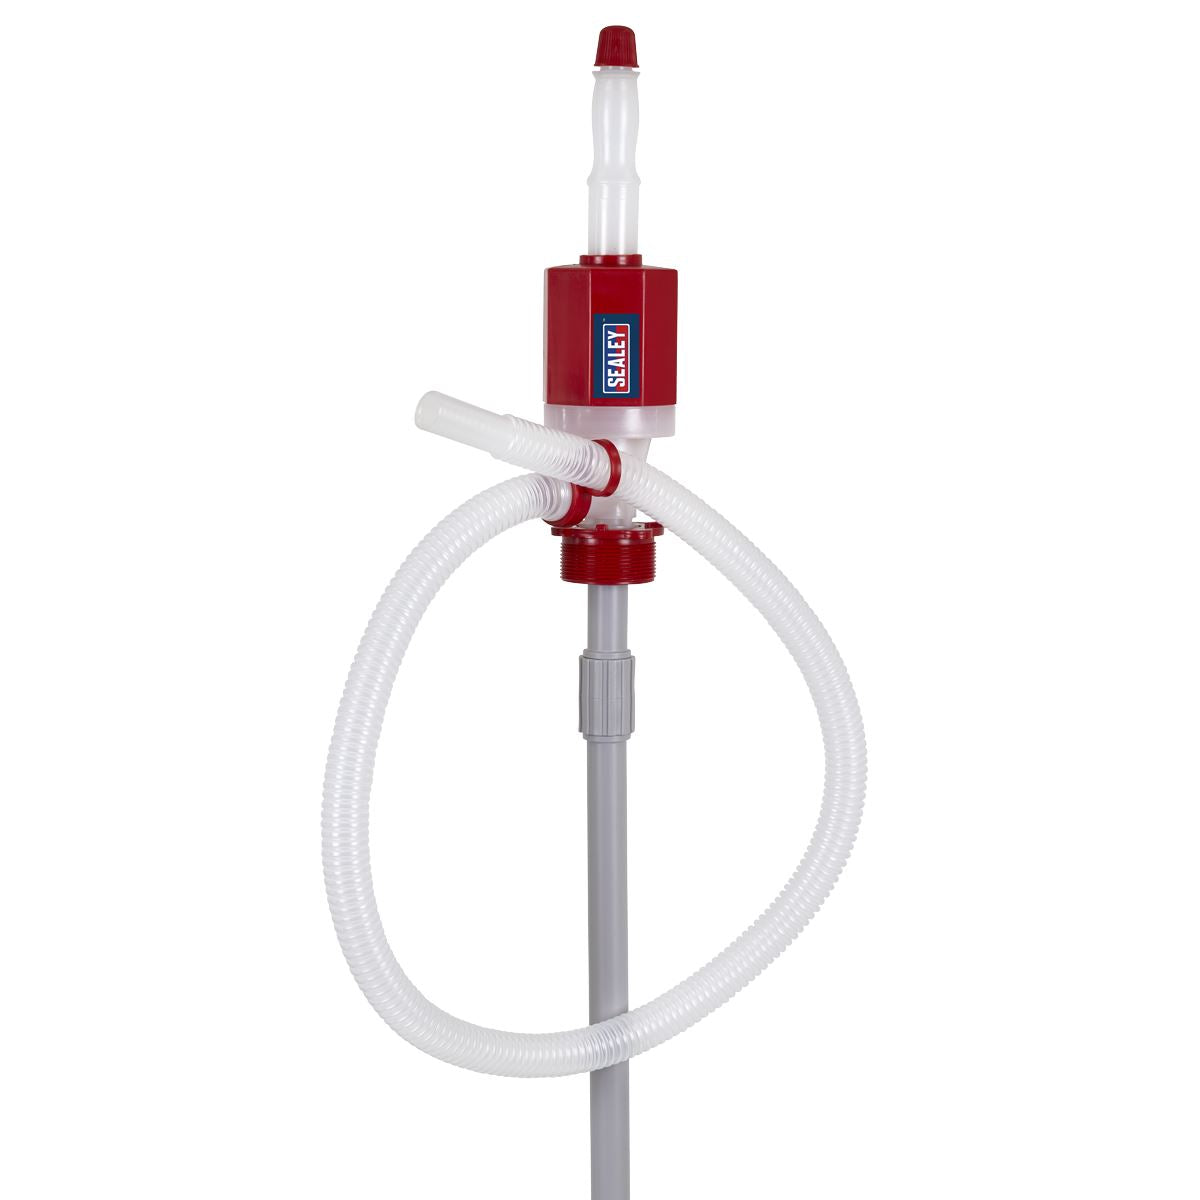 Sealey Syphon Pump with Segmented Suction Pipe High Flow